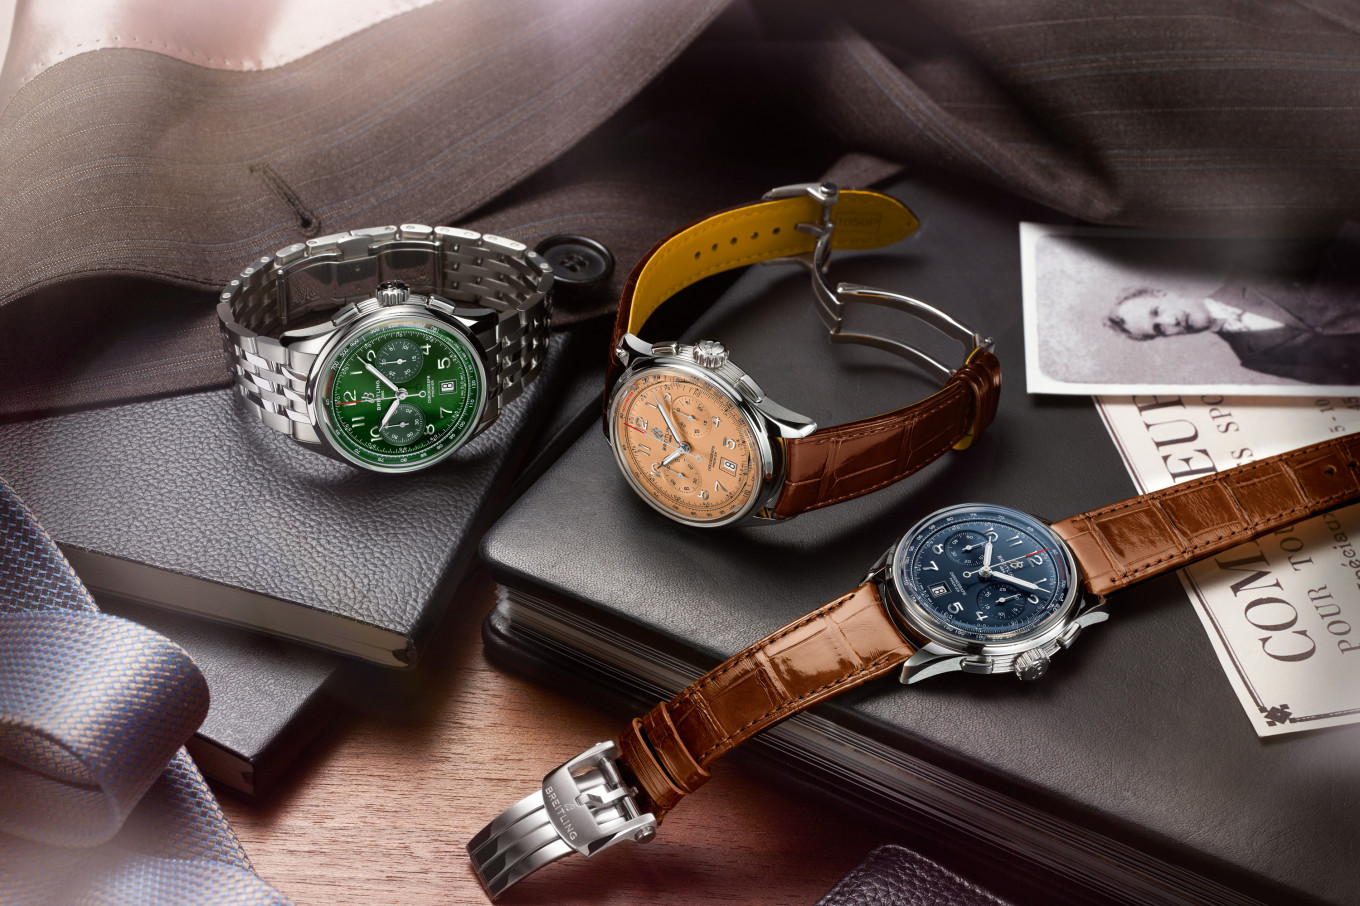 Breitling Introduces Six New Models for the Premier Collection